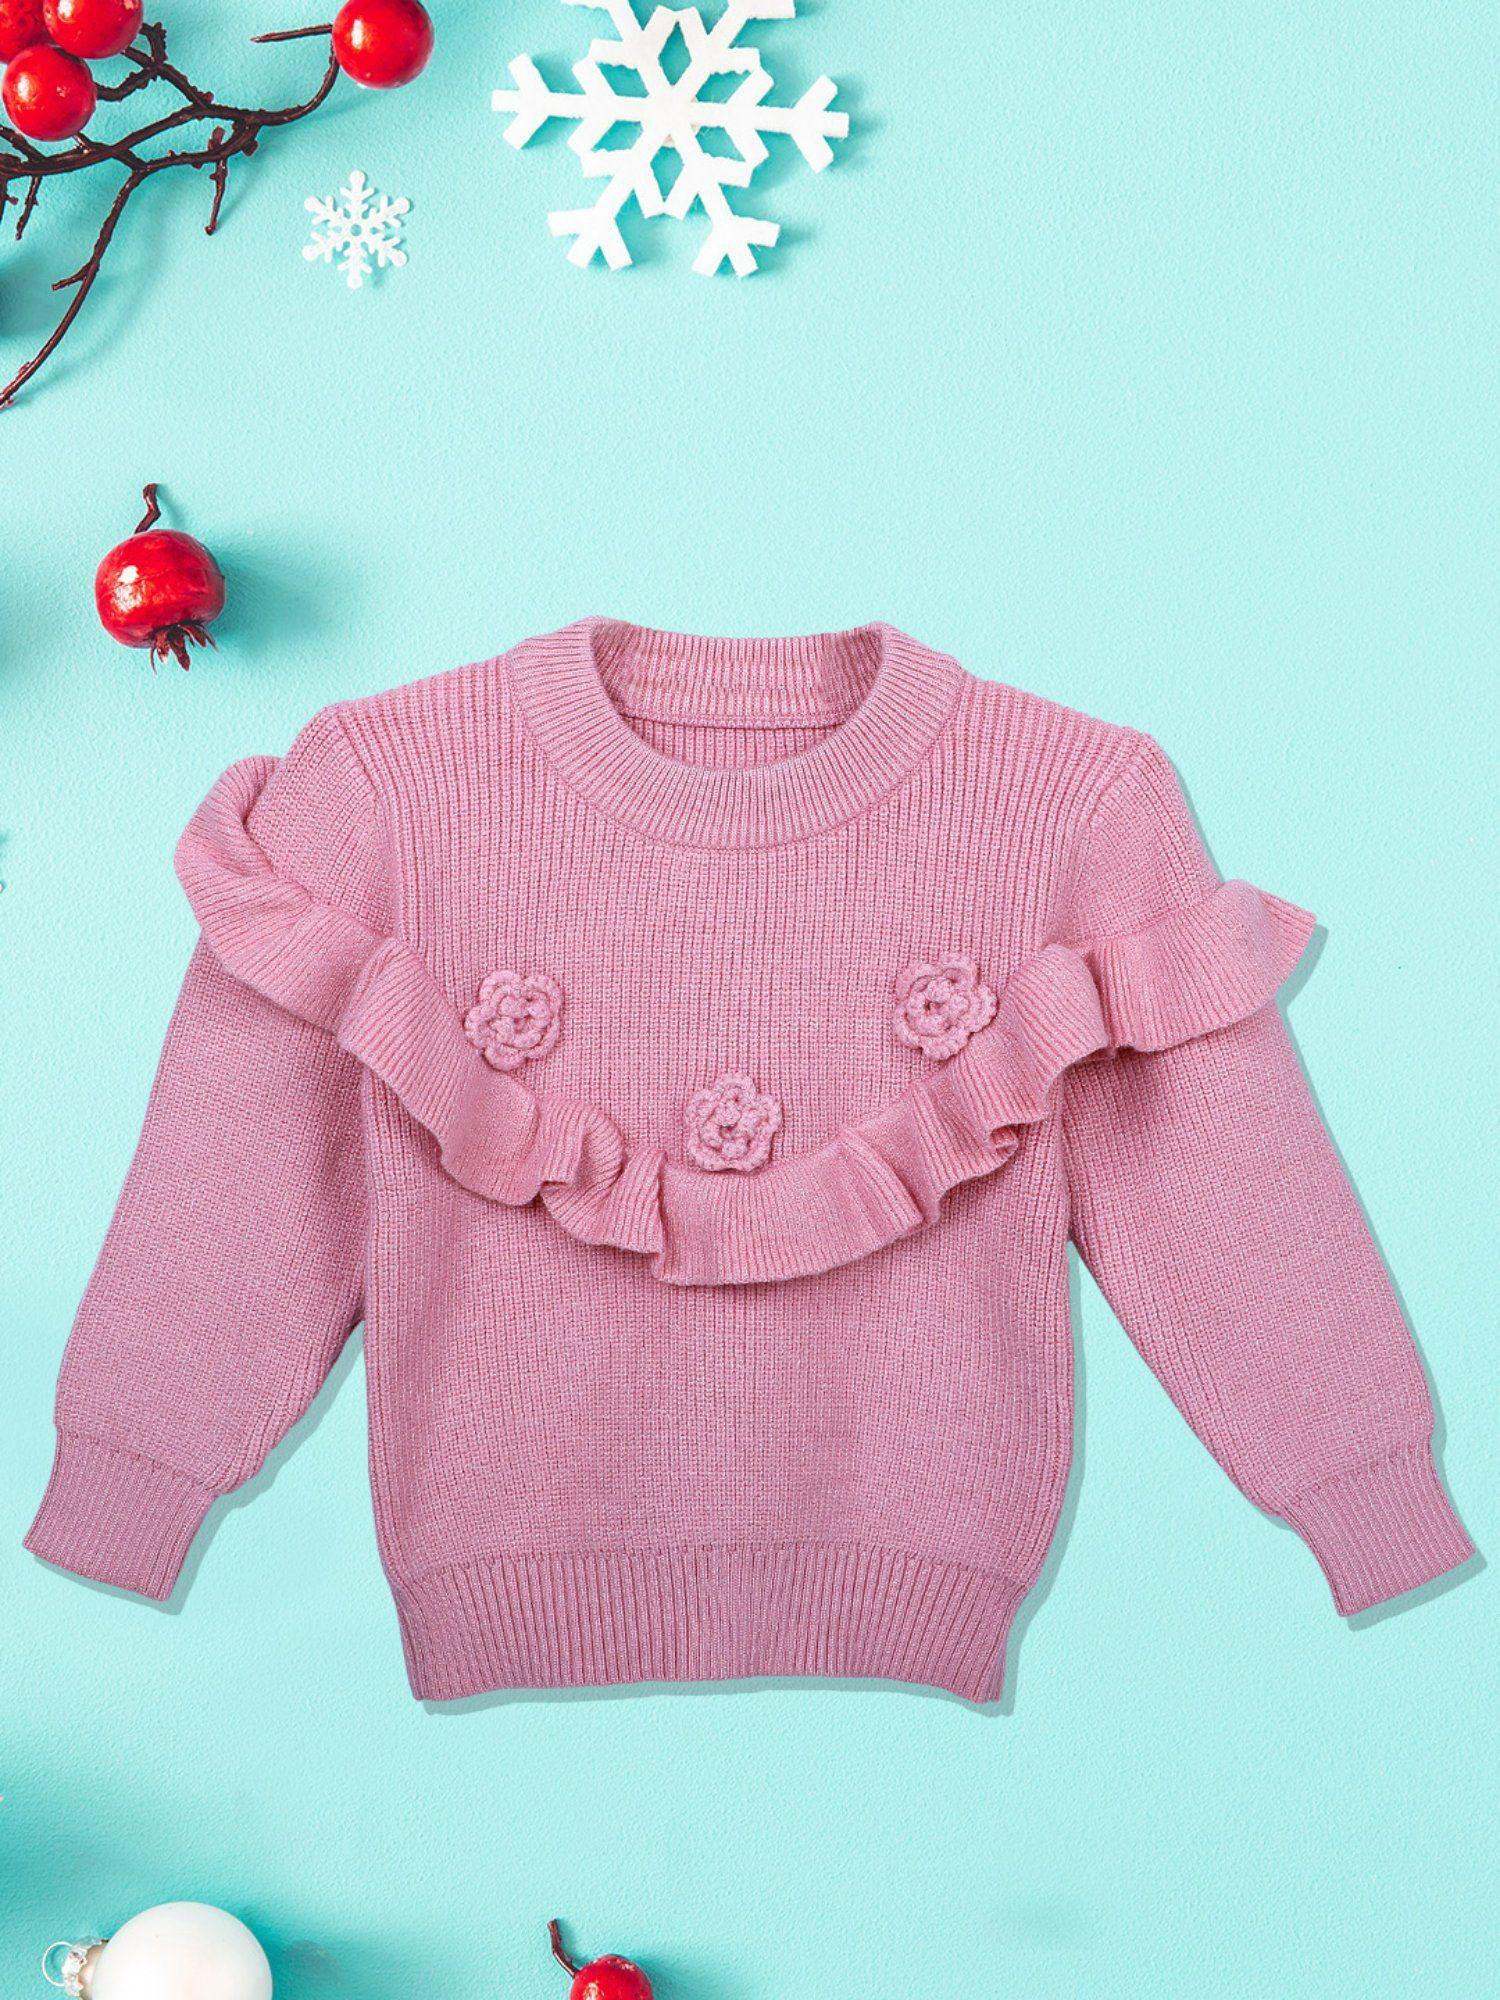 flowers-and-frills-premium-full-sleeves-knitted-sweater-pink